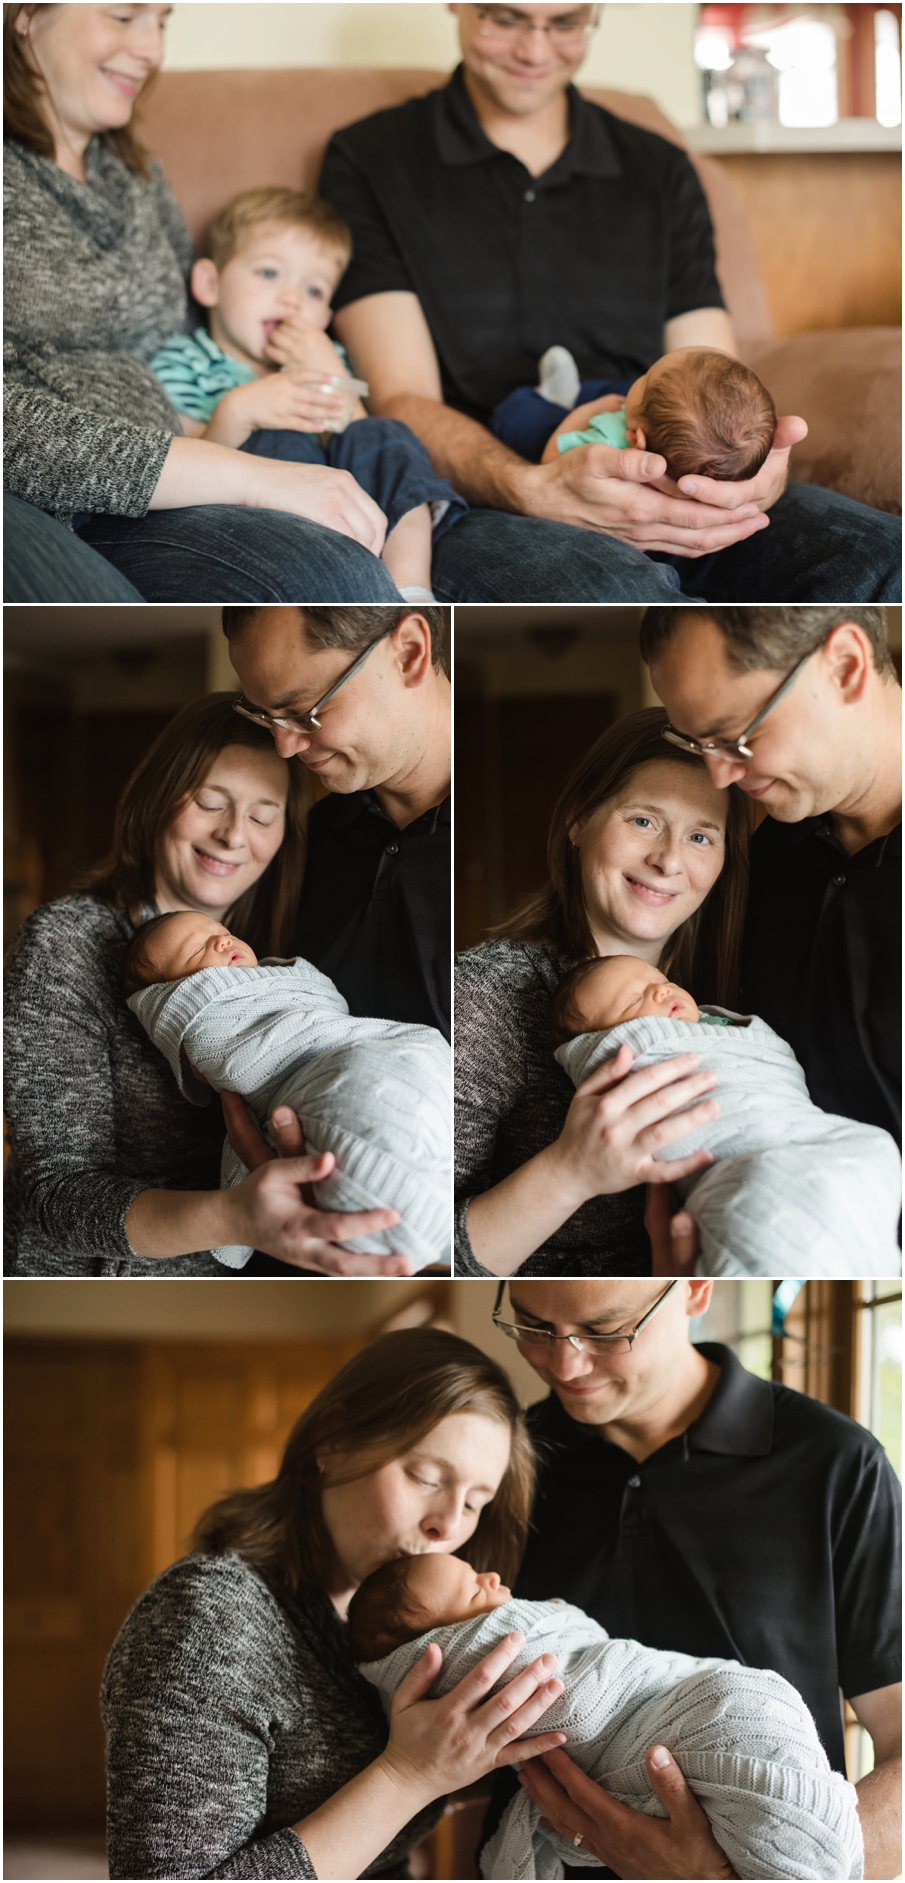 View More: http://freshframephotography.pass.us/baby-ryder-welcome